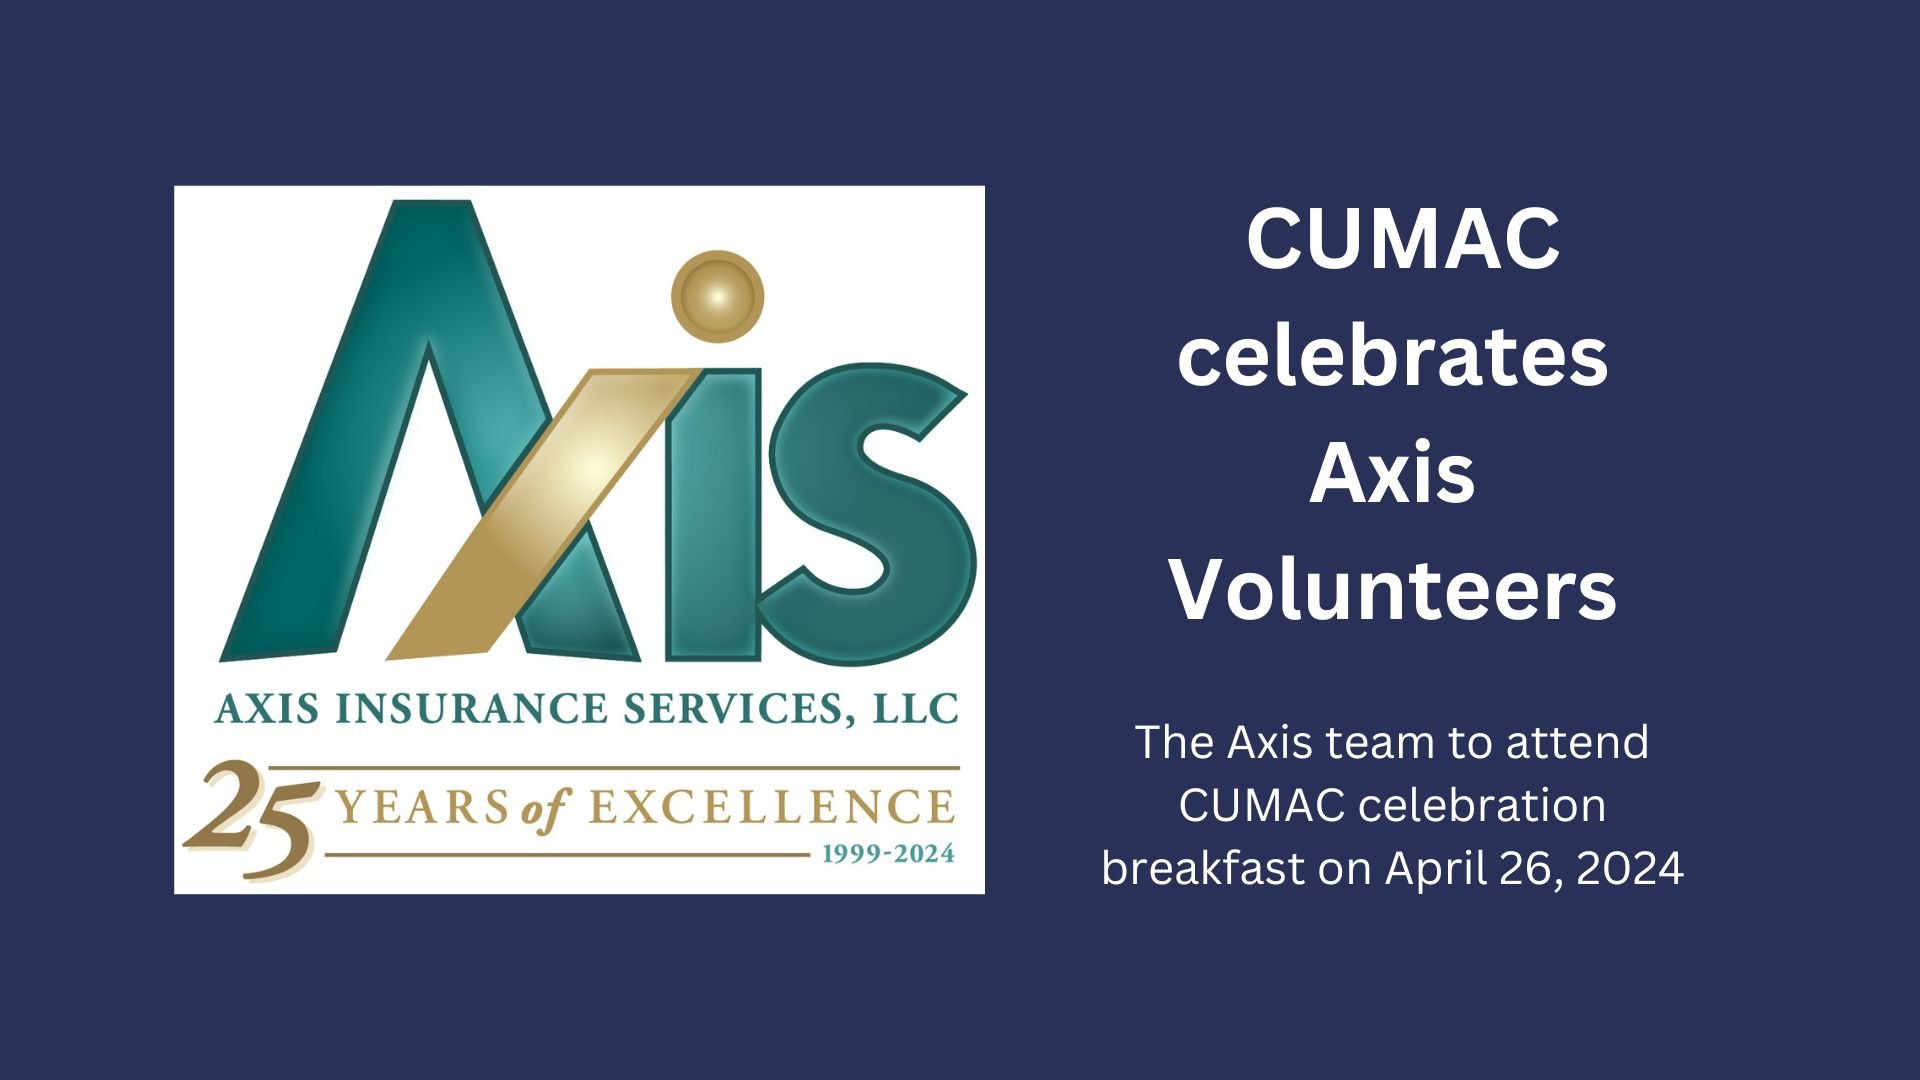 Axis Insurance Services, LLC to celebrate CUMAC's Volunteers